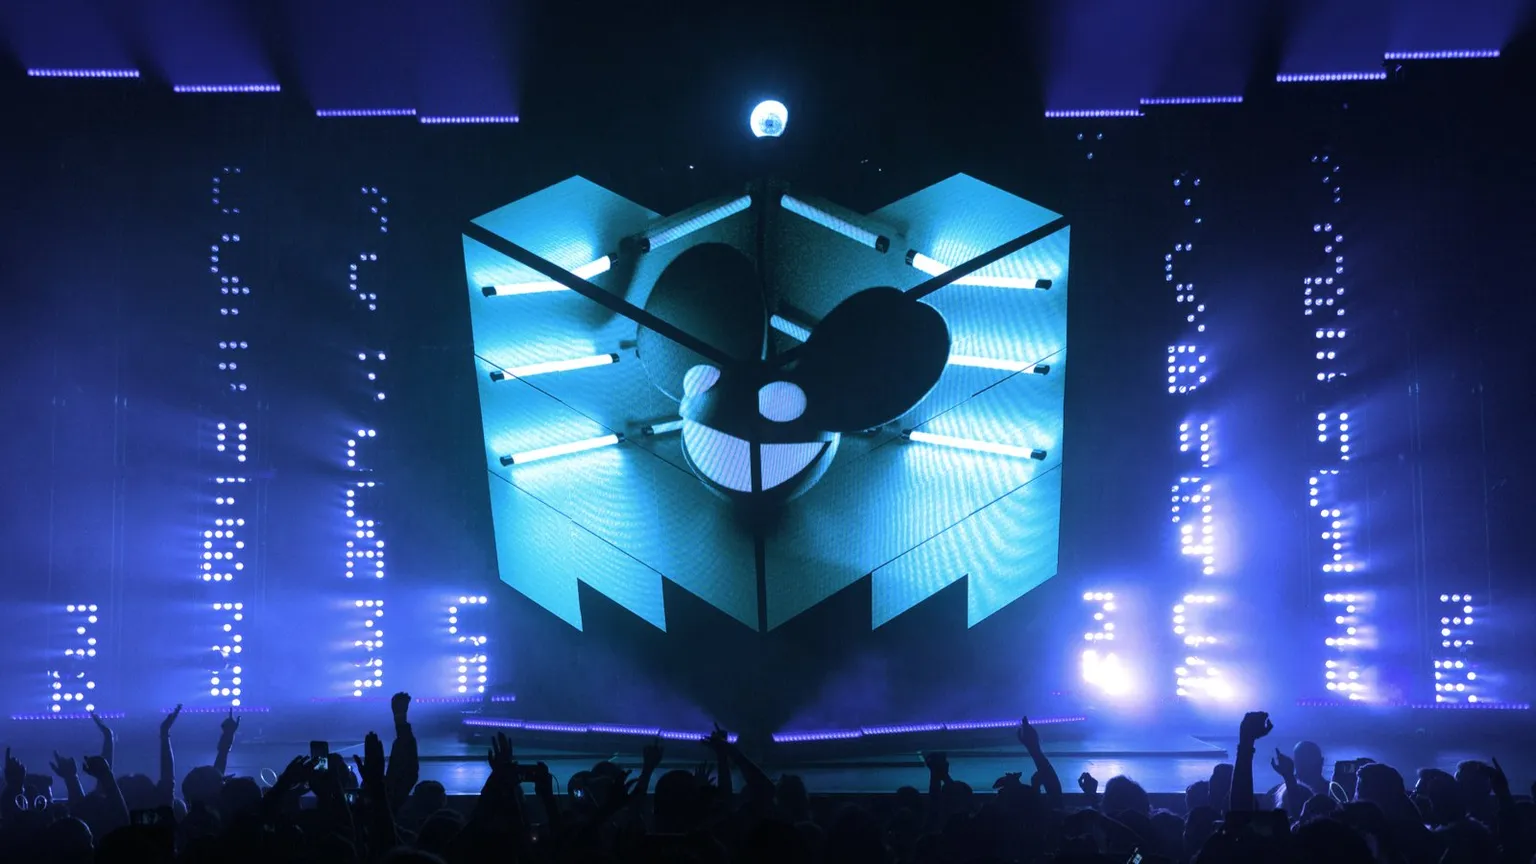 Deadmau5 is one of the artists who's signed up to Audius. Image: Shutterstock